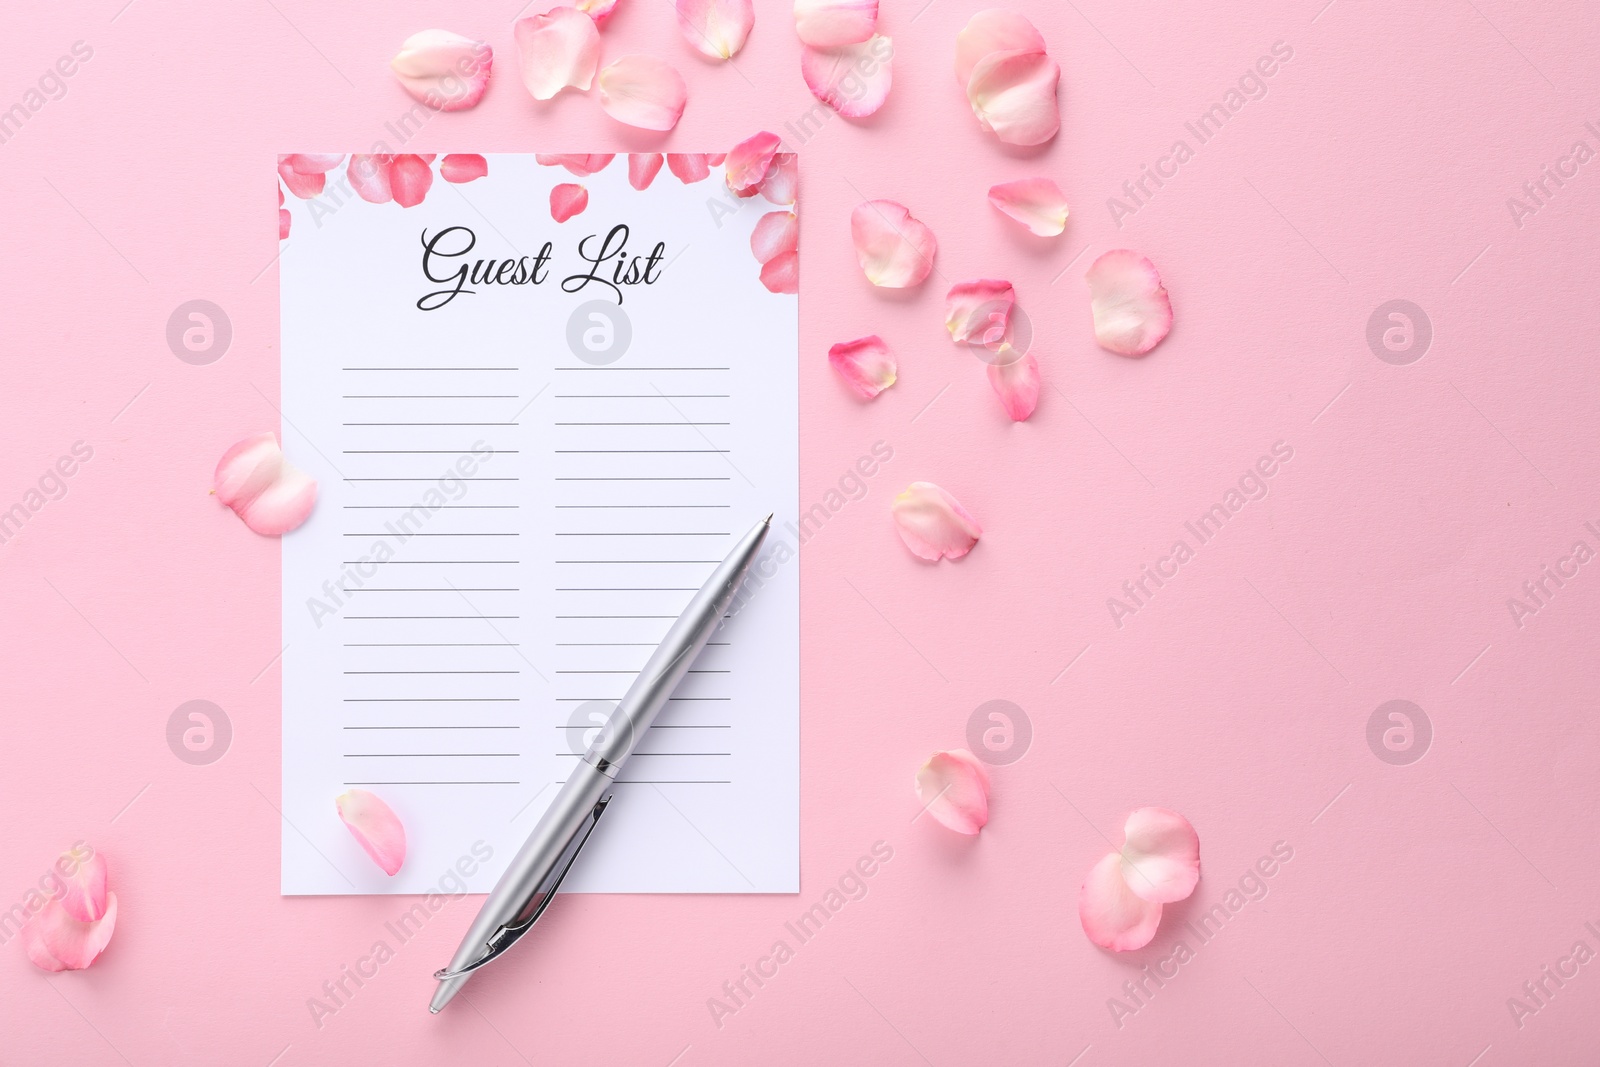 Photo of Guest list, pen and petals on pink background, flat lay. Space for text